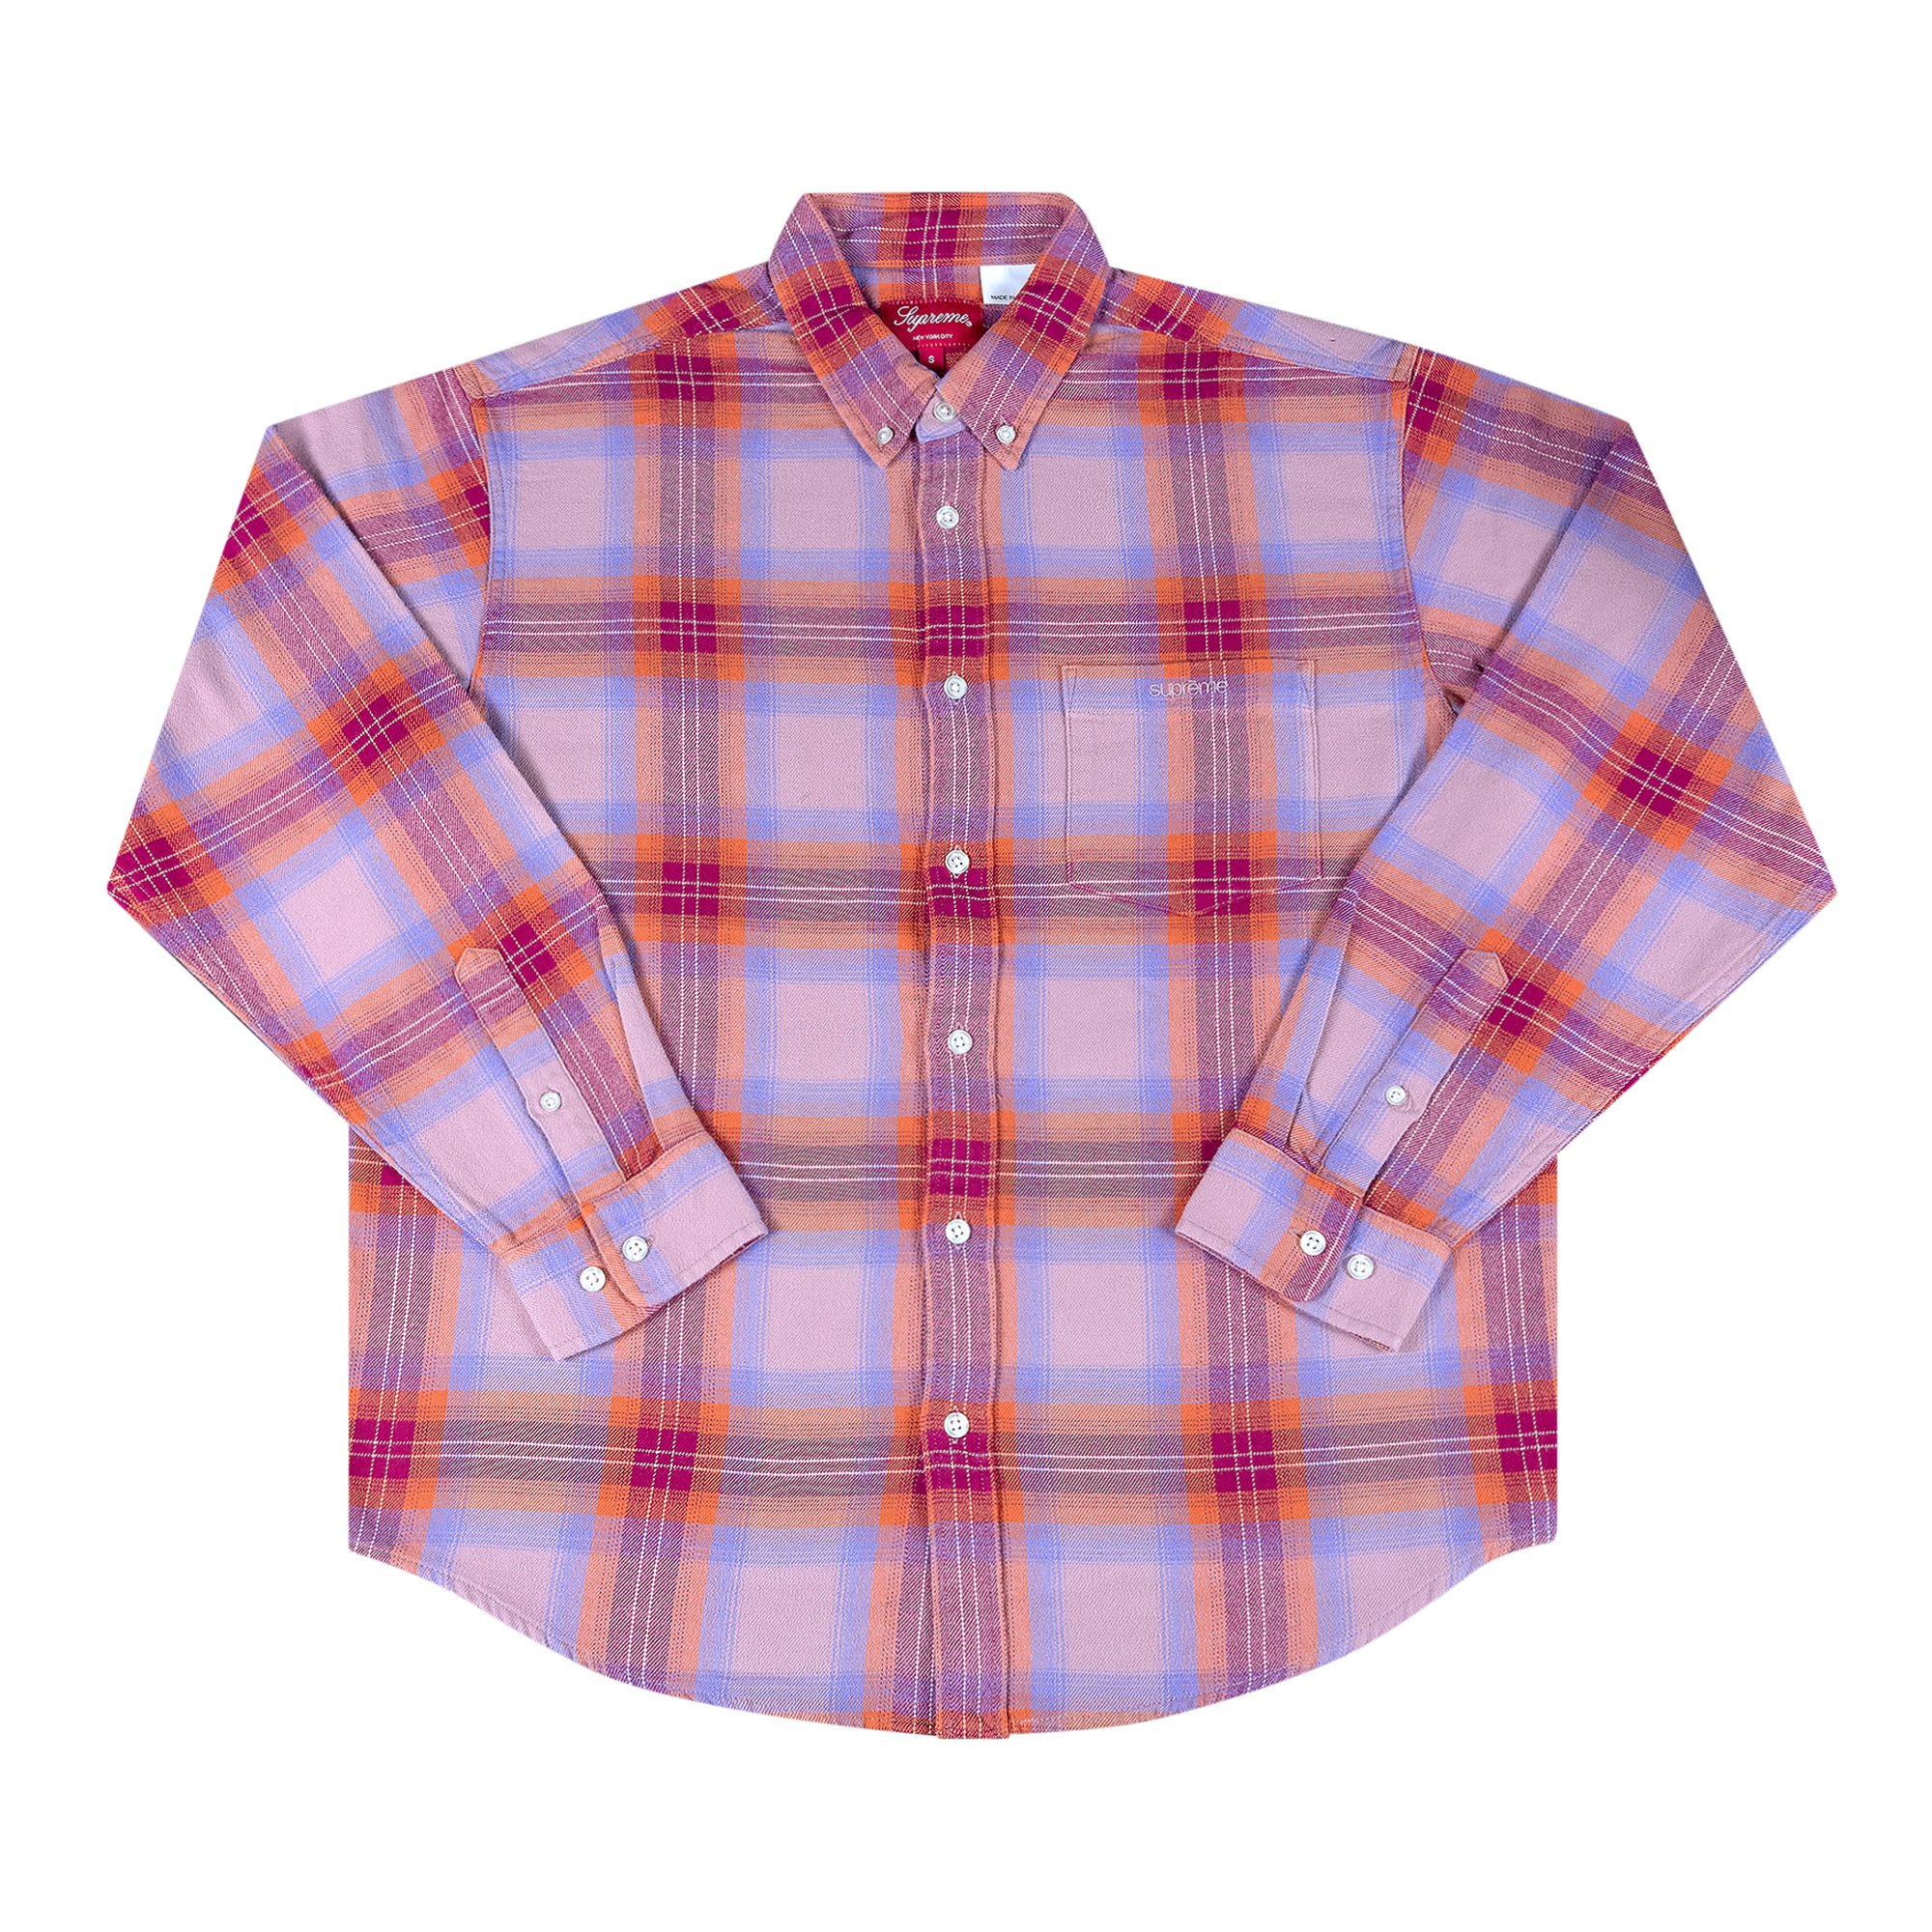 Buy Supreme Brushed Plaid Flannel Shirt 'Pink' - SS22S8 PINK | GOAT